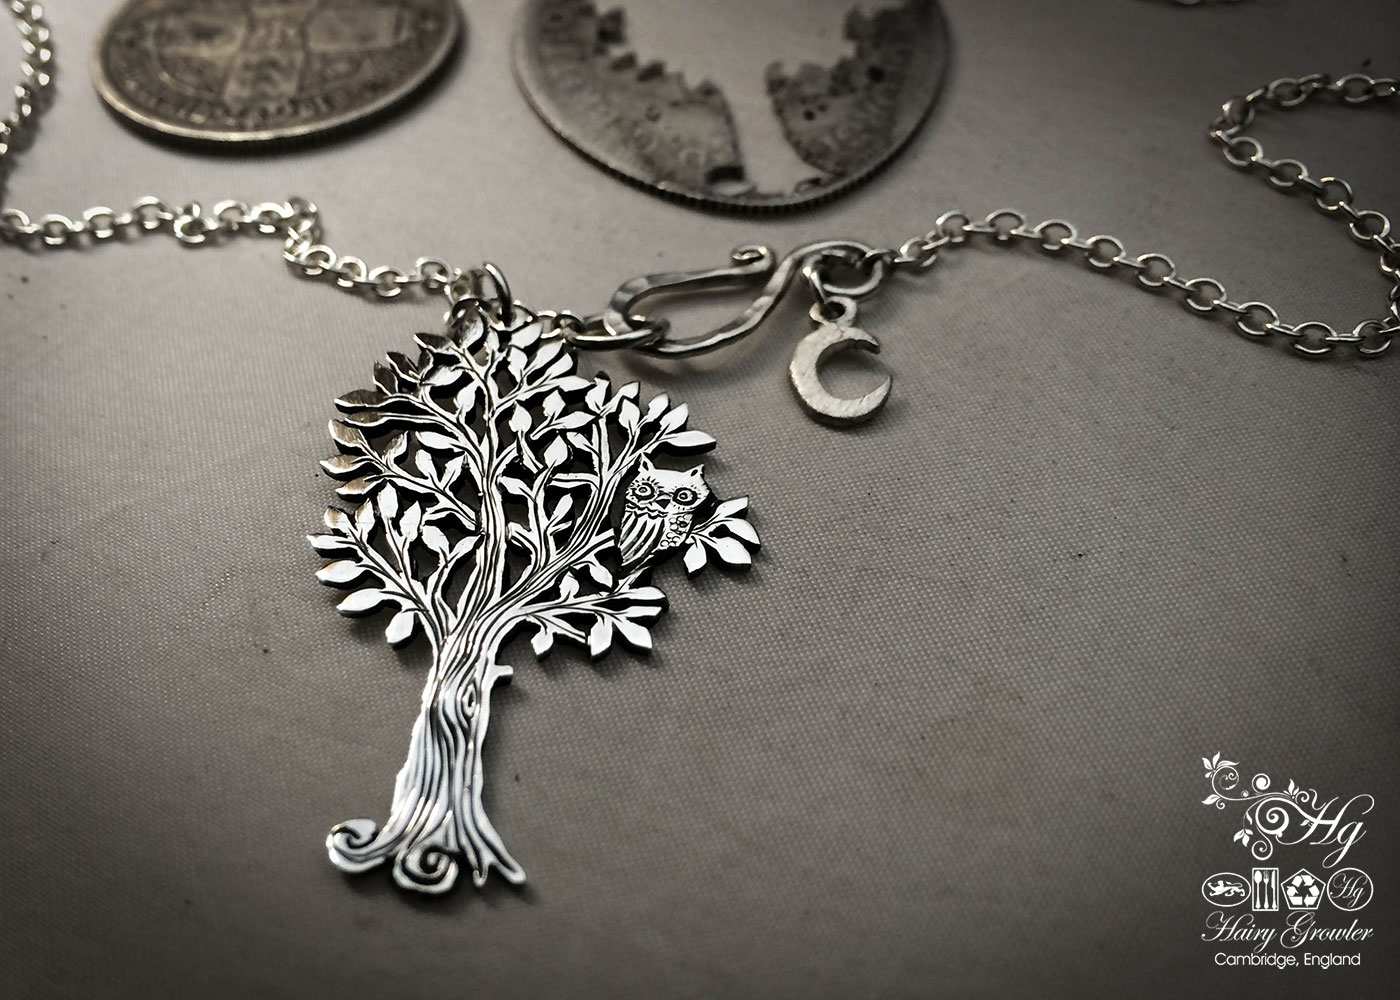 Handmade and repurposed silver woodland tree with owl sitting in the branches